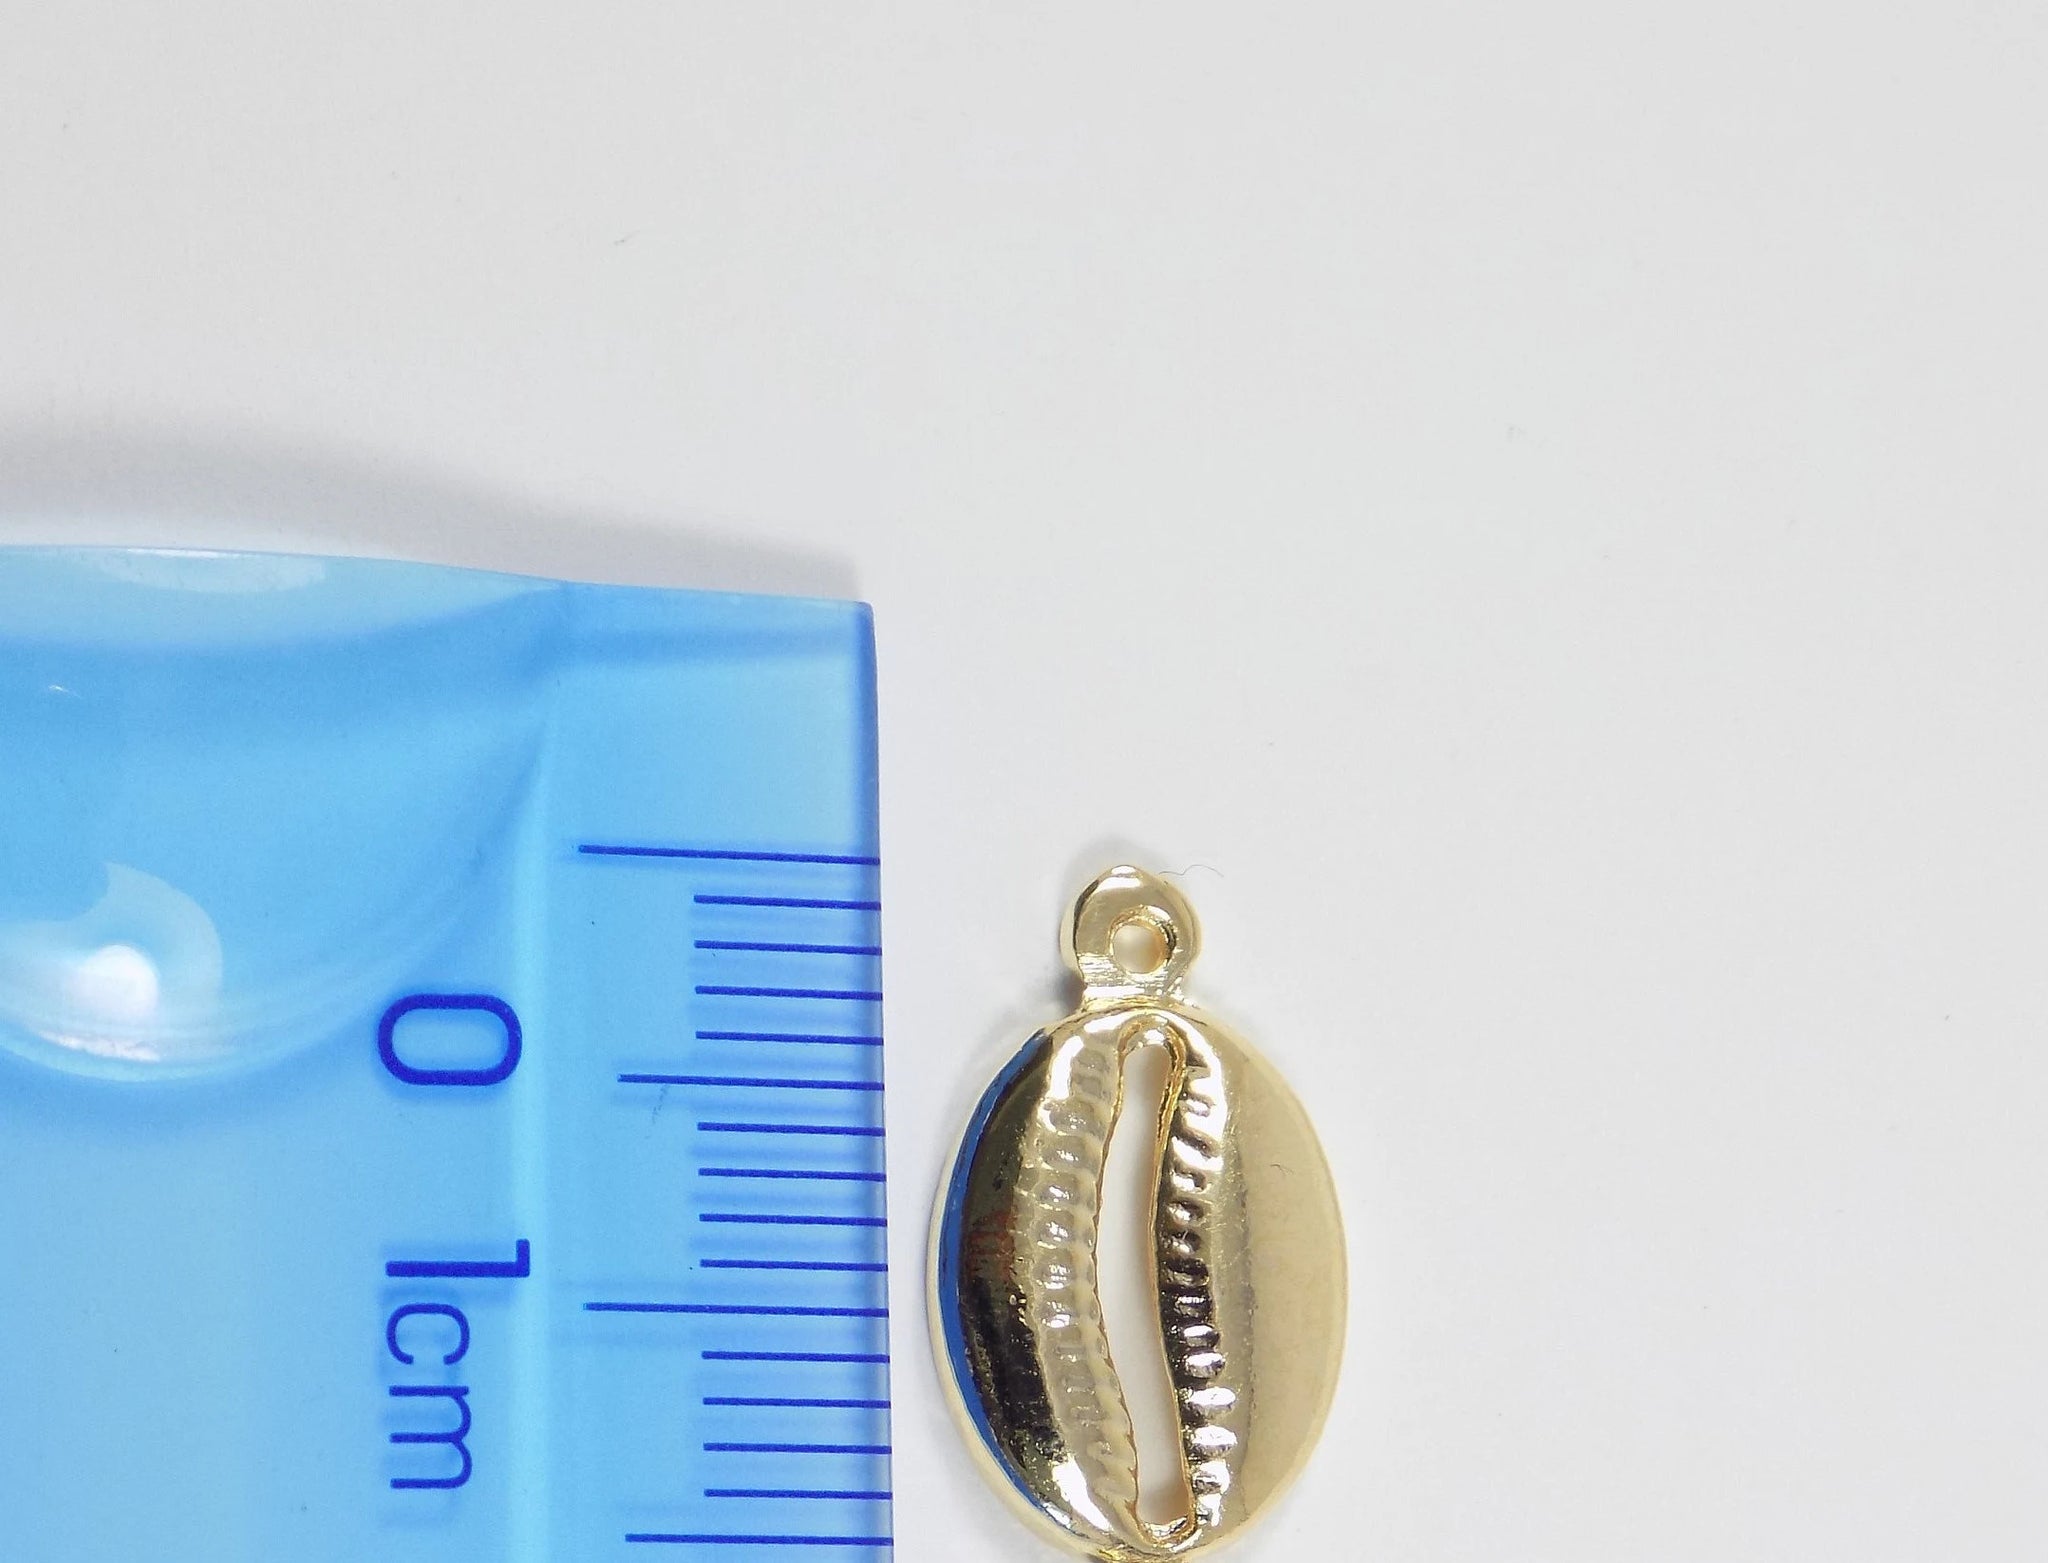 Cowrie Shell Charm Pendant 16x 9.70mm Dainty Seashell Pendant for Necklace, Bracelet, Earrings, 18K Gold Plated Excellent Quality